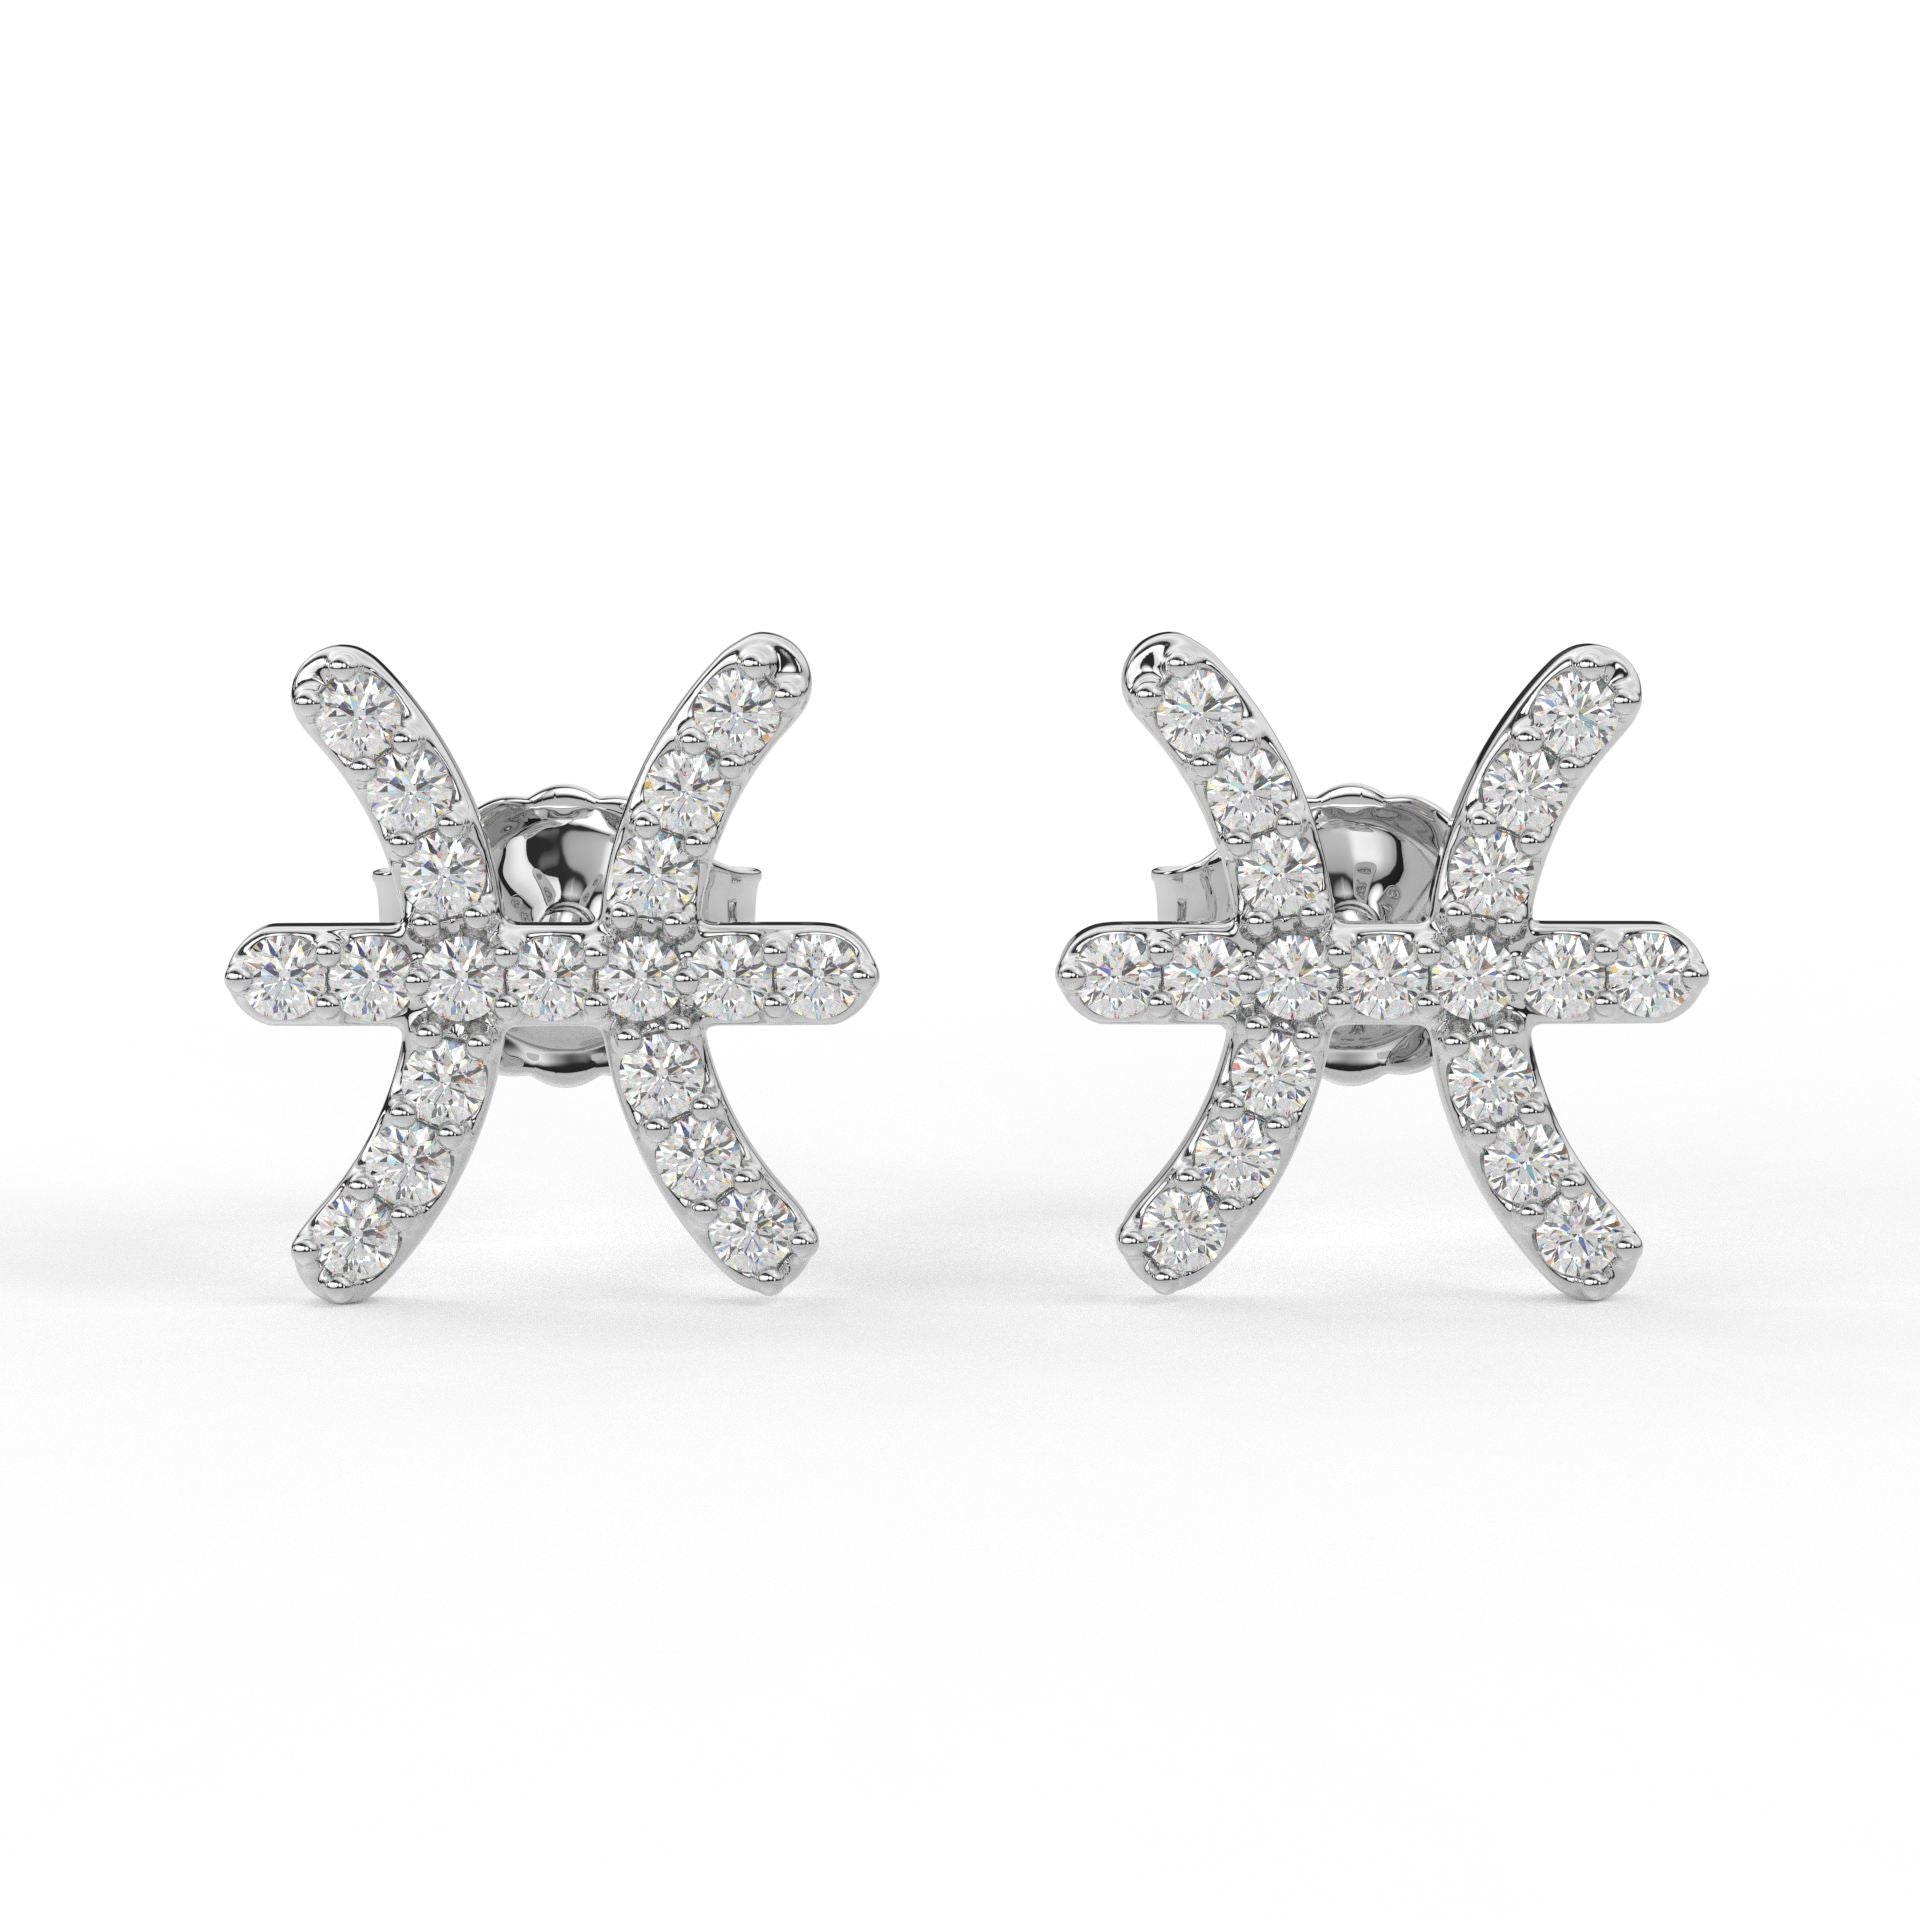 Pisces Zodiac Earrings- Moissanite and Lab diamond ear rings by Vai Ra